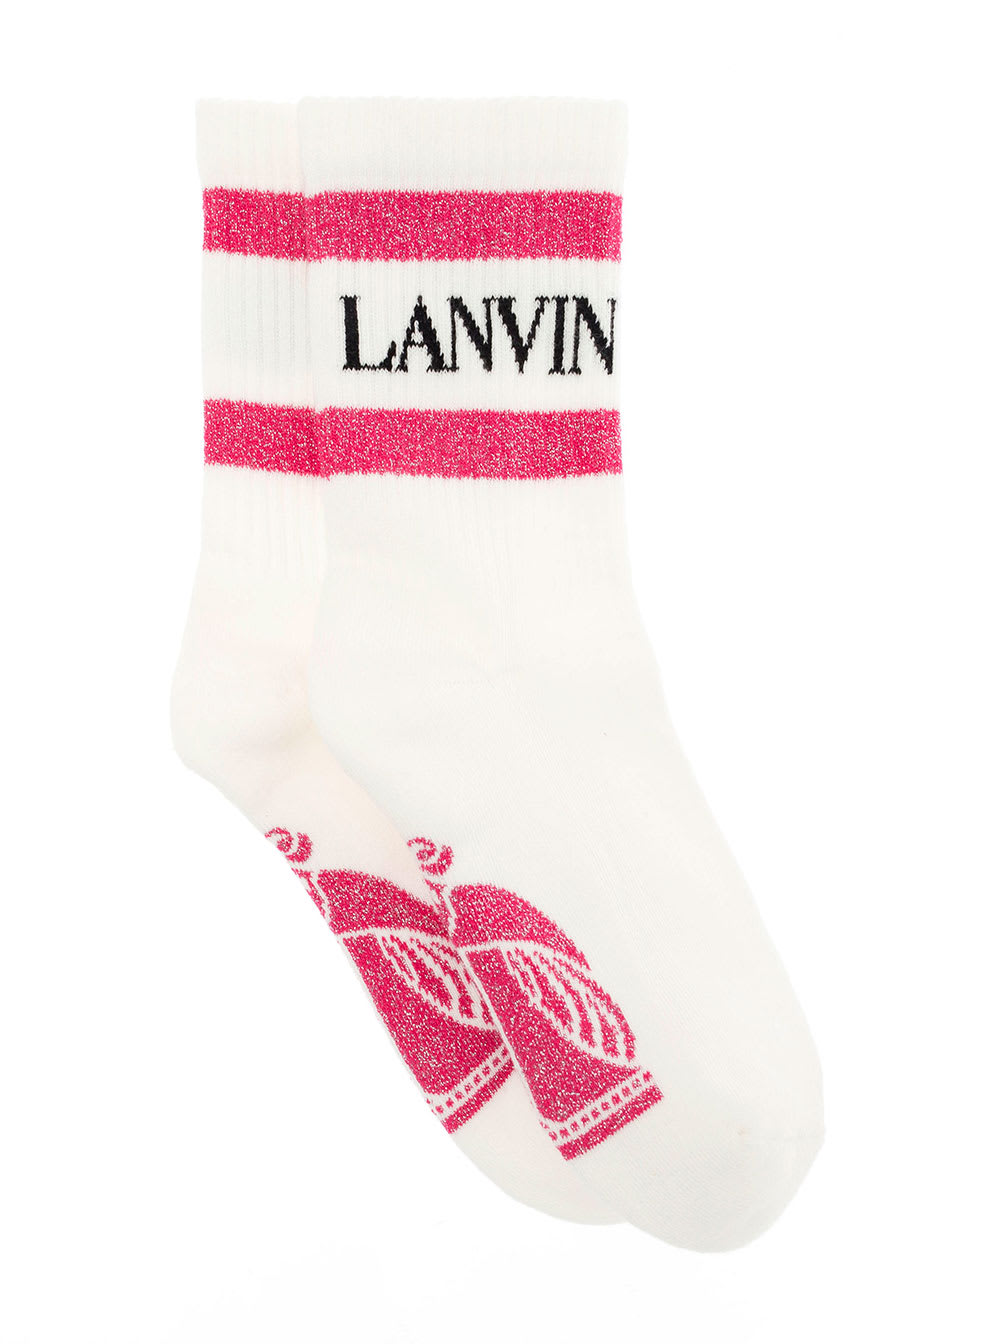 LANVIN LANVIN WOMENS WHITE AND PINK COTTON SOCKS WITH LOGO